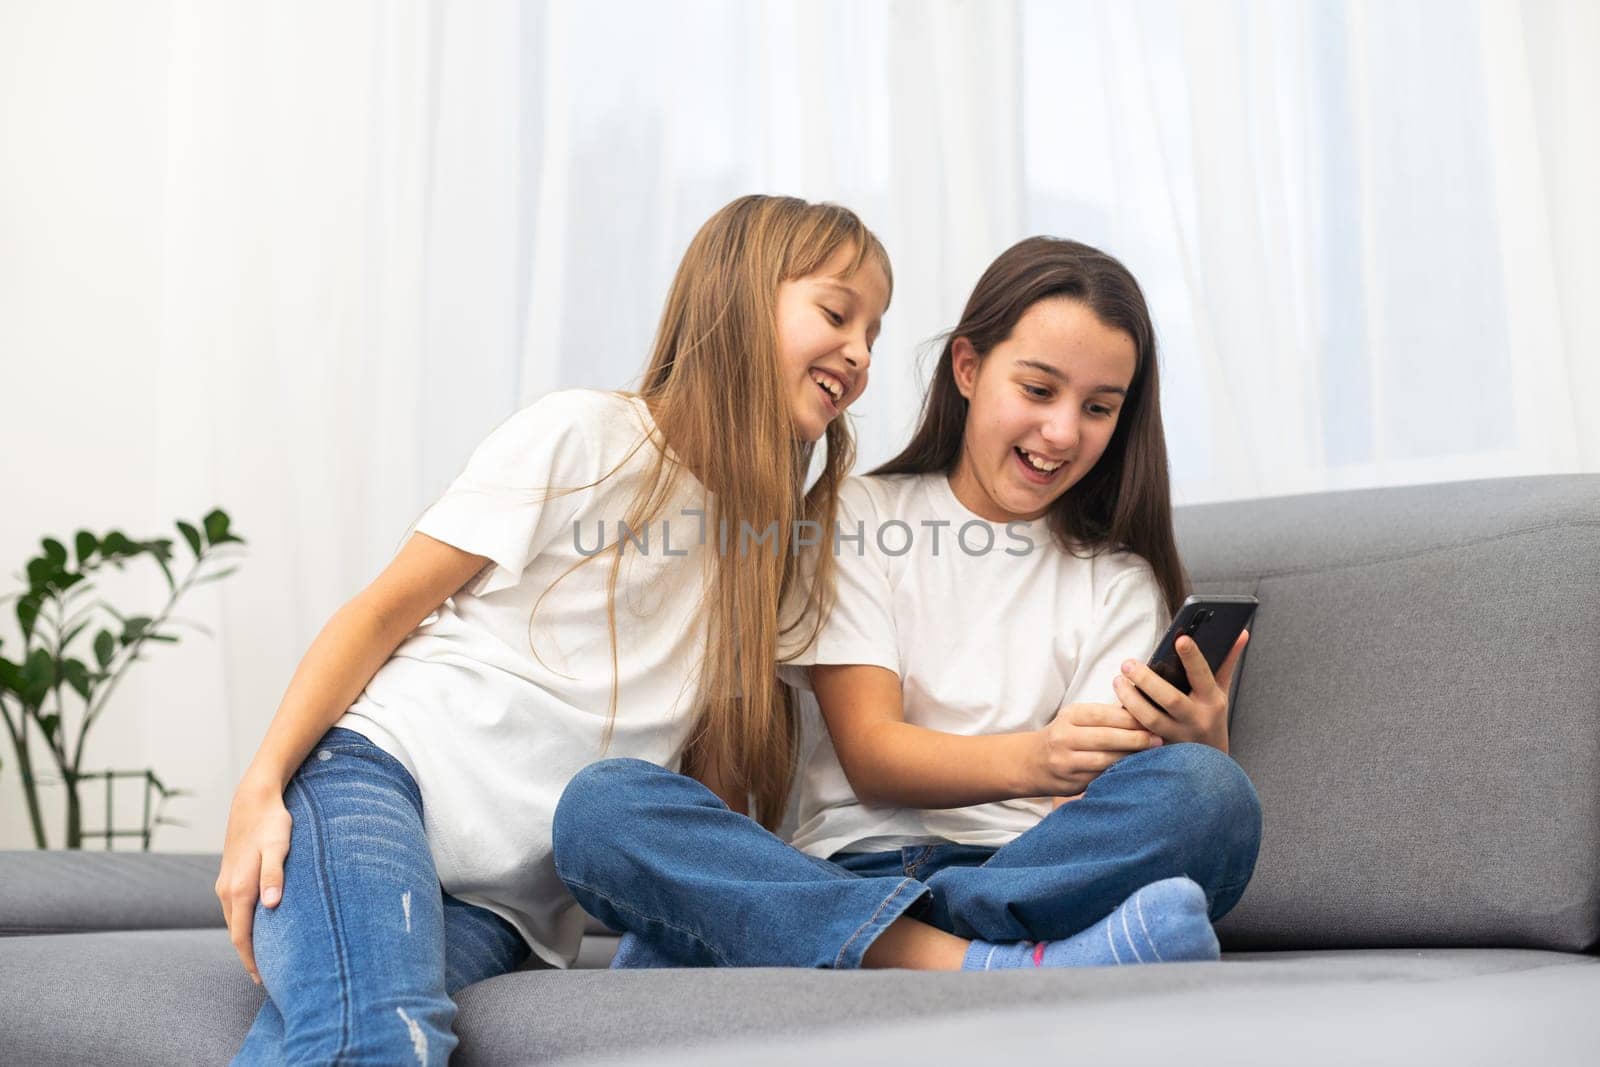 Children play with a mobile phone at home. High quality photo